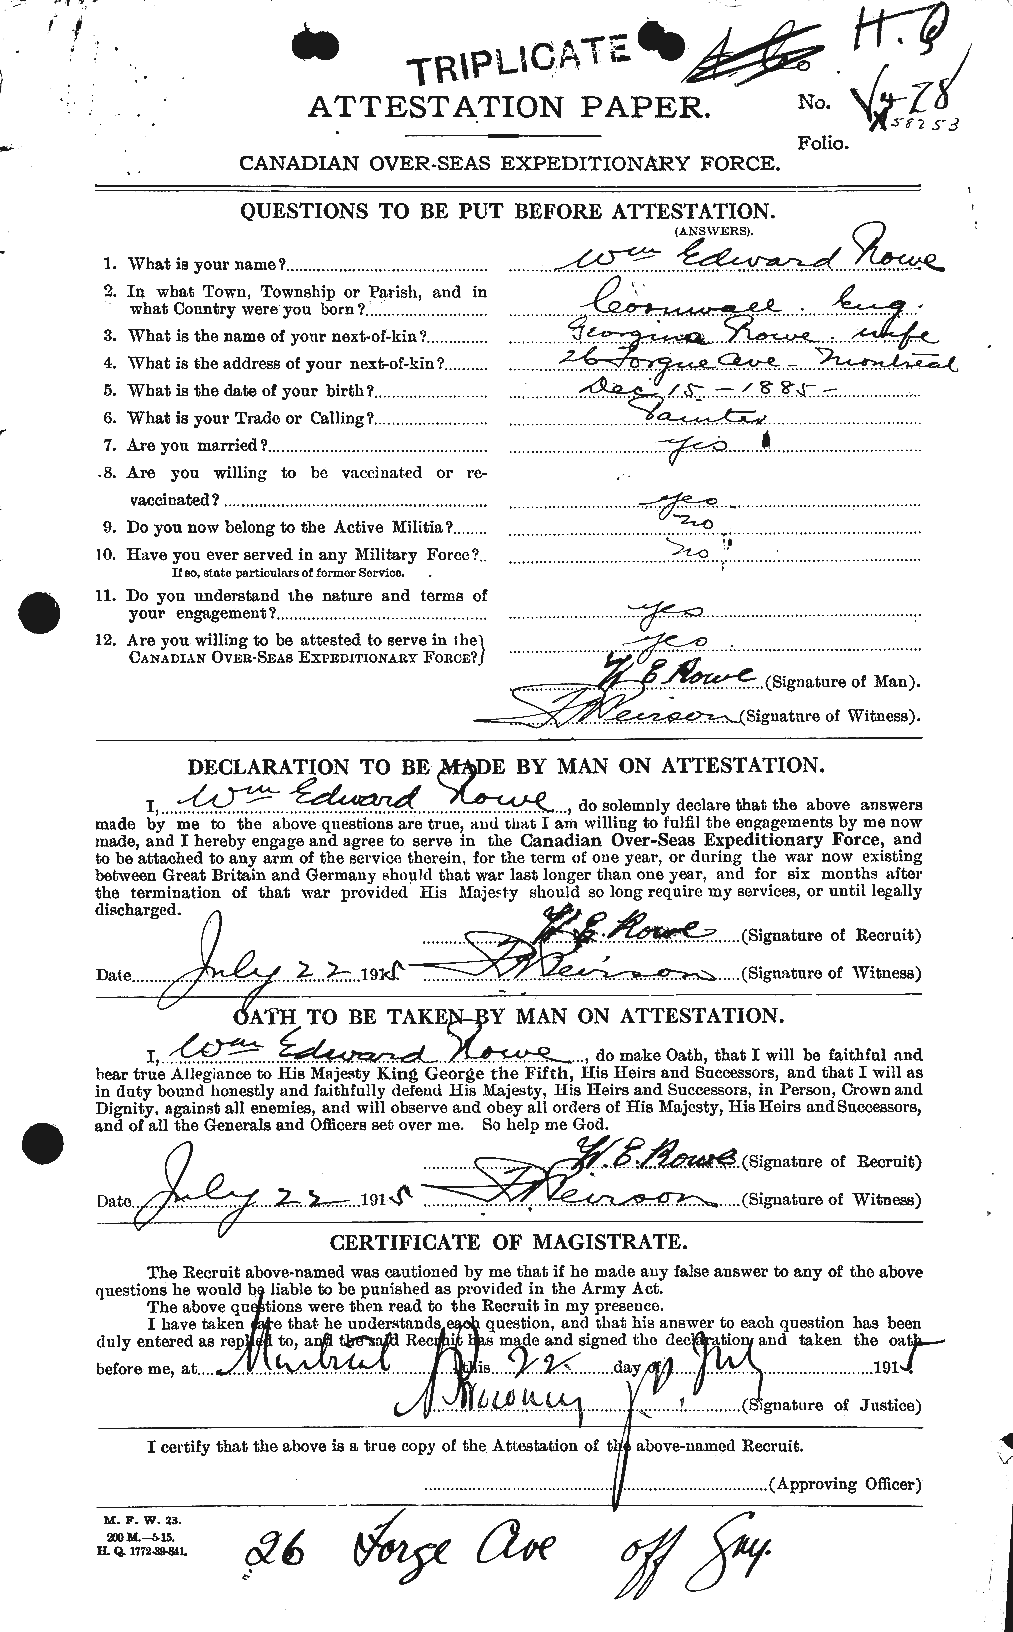 Personnel Records of the First World War - CEF 616025a